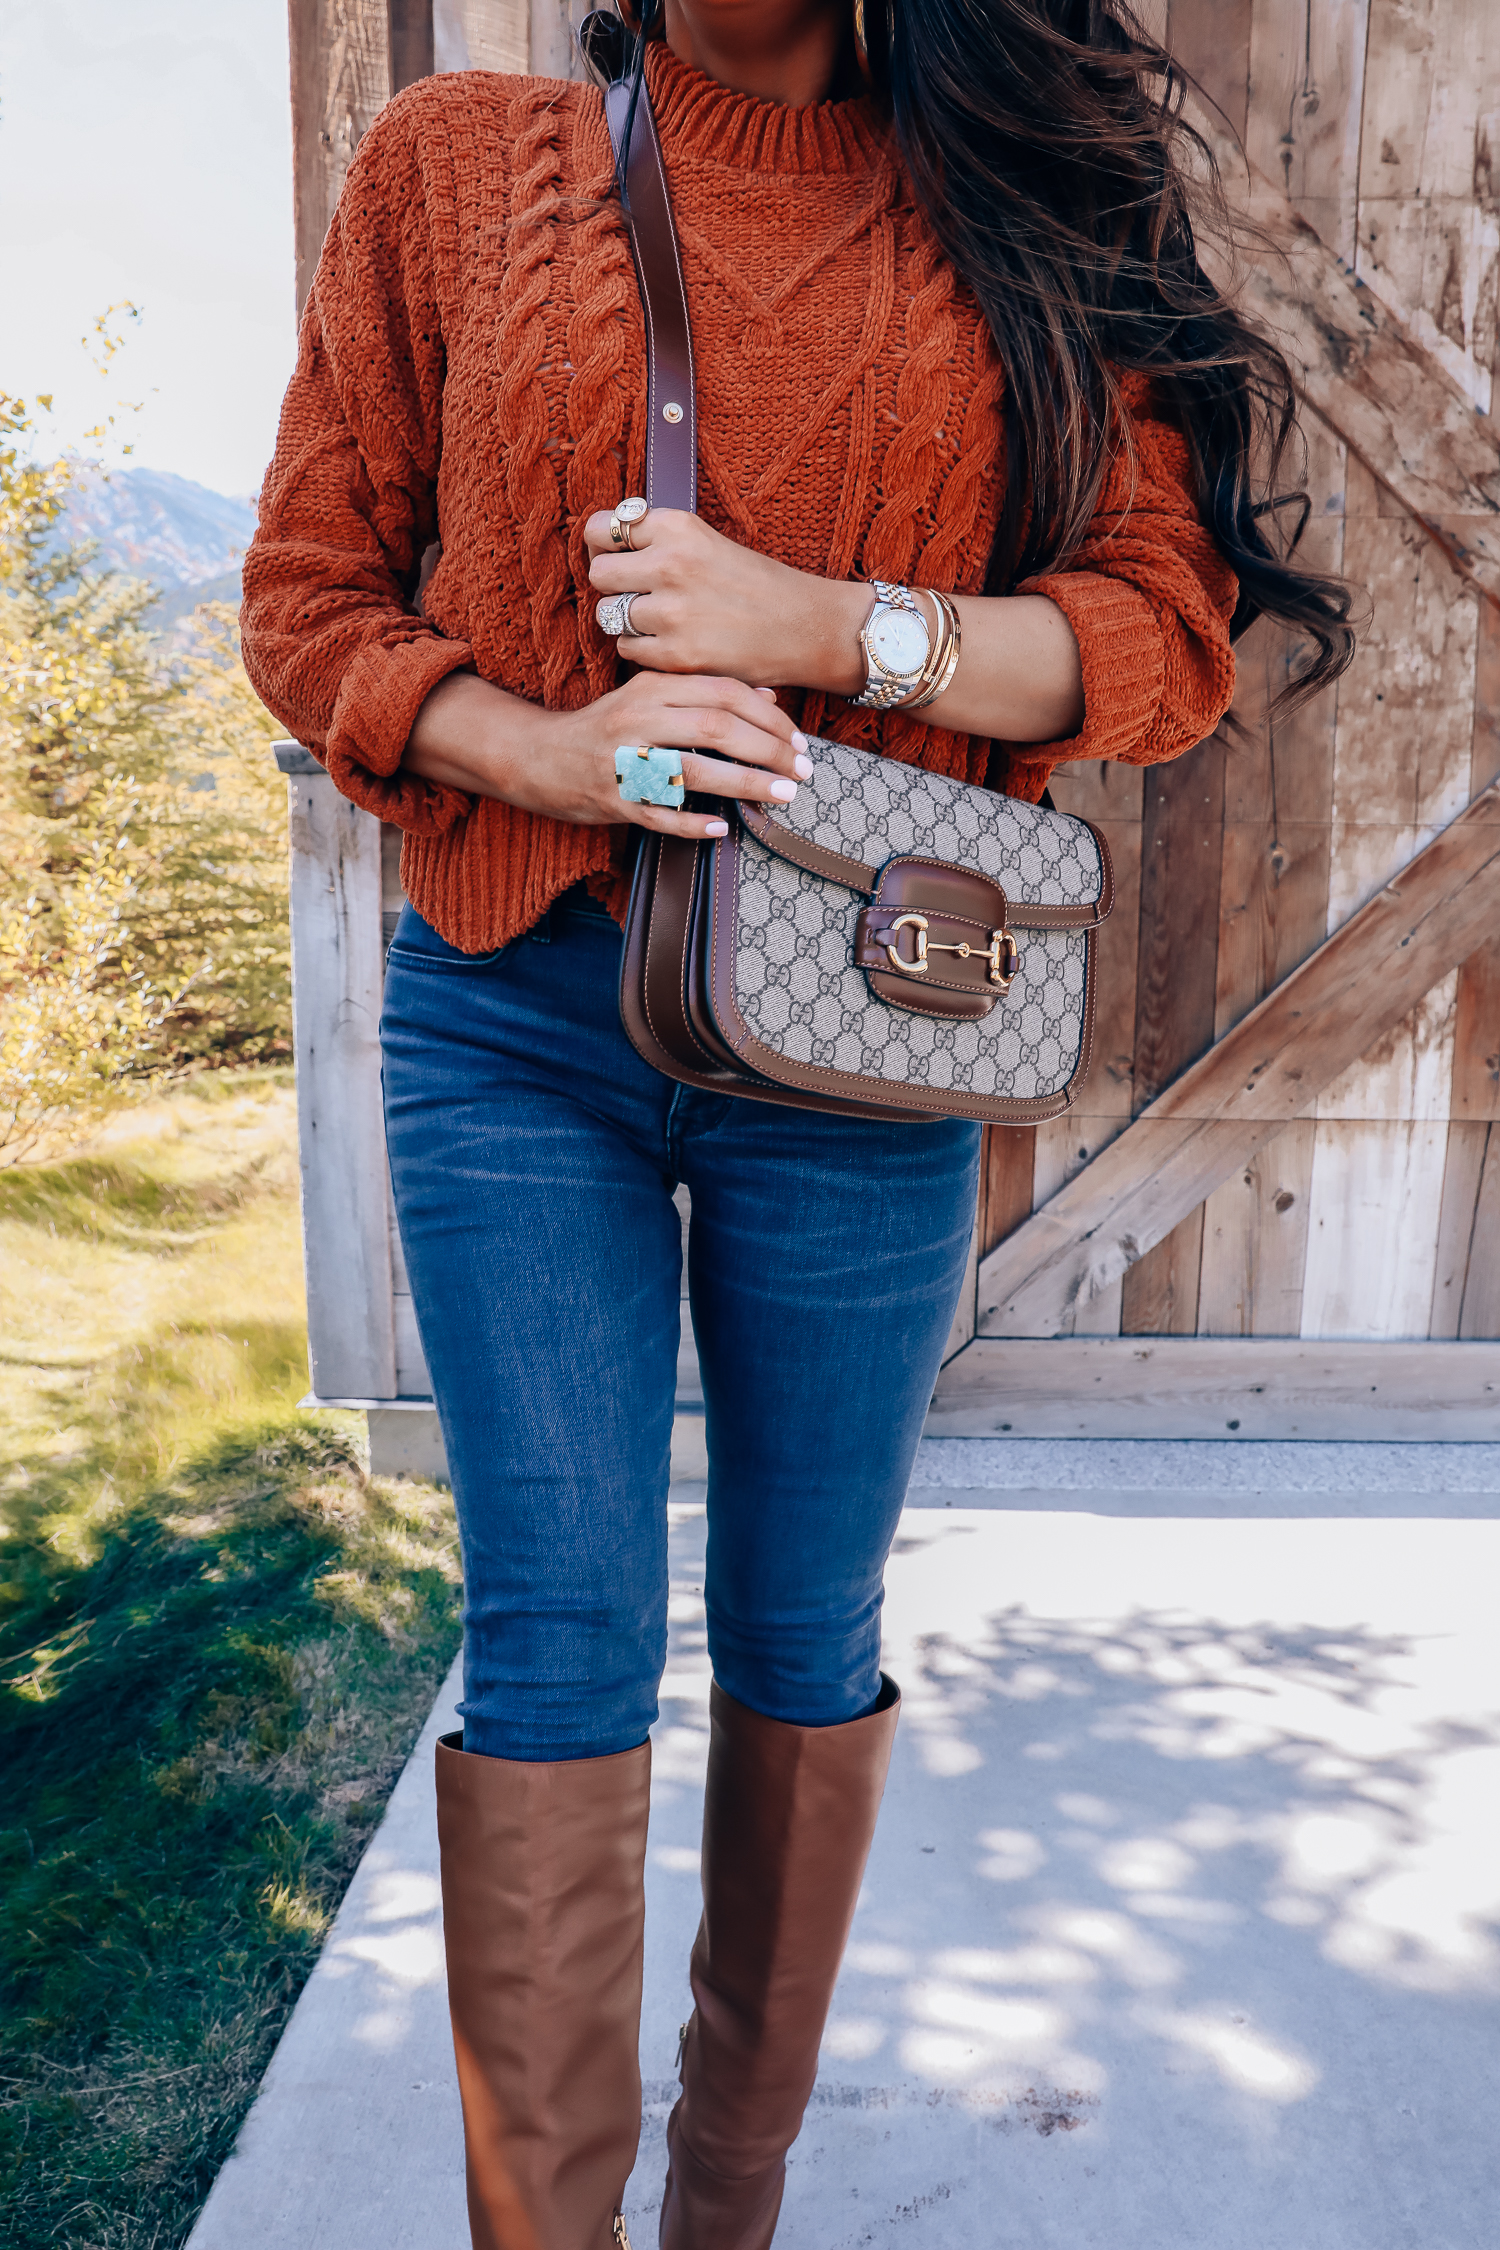 Fall fashion outfit featured by top US fashion blog, The Sweetest Thing: image of a woman wearing a BlankNYC rust sweater, Express denim leggings, Sam Edelman boots, Gucci 1955 shoulder bag, Cartie bracelets, Argento Vivo earrings, Gucci sunglasses and a Free People ring.| fall fashion outfits pinterest 2019, gucci vintage 1955 fall, emily ann gemma, sam edelman brown leather boots_-2